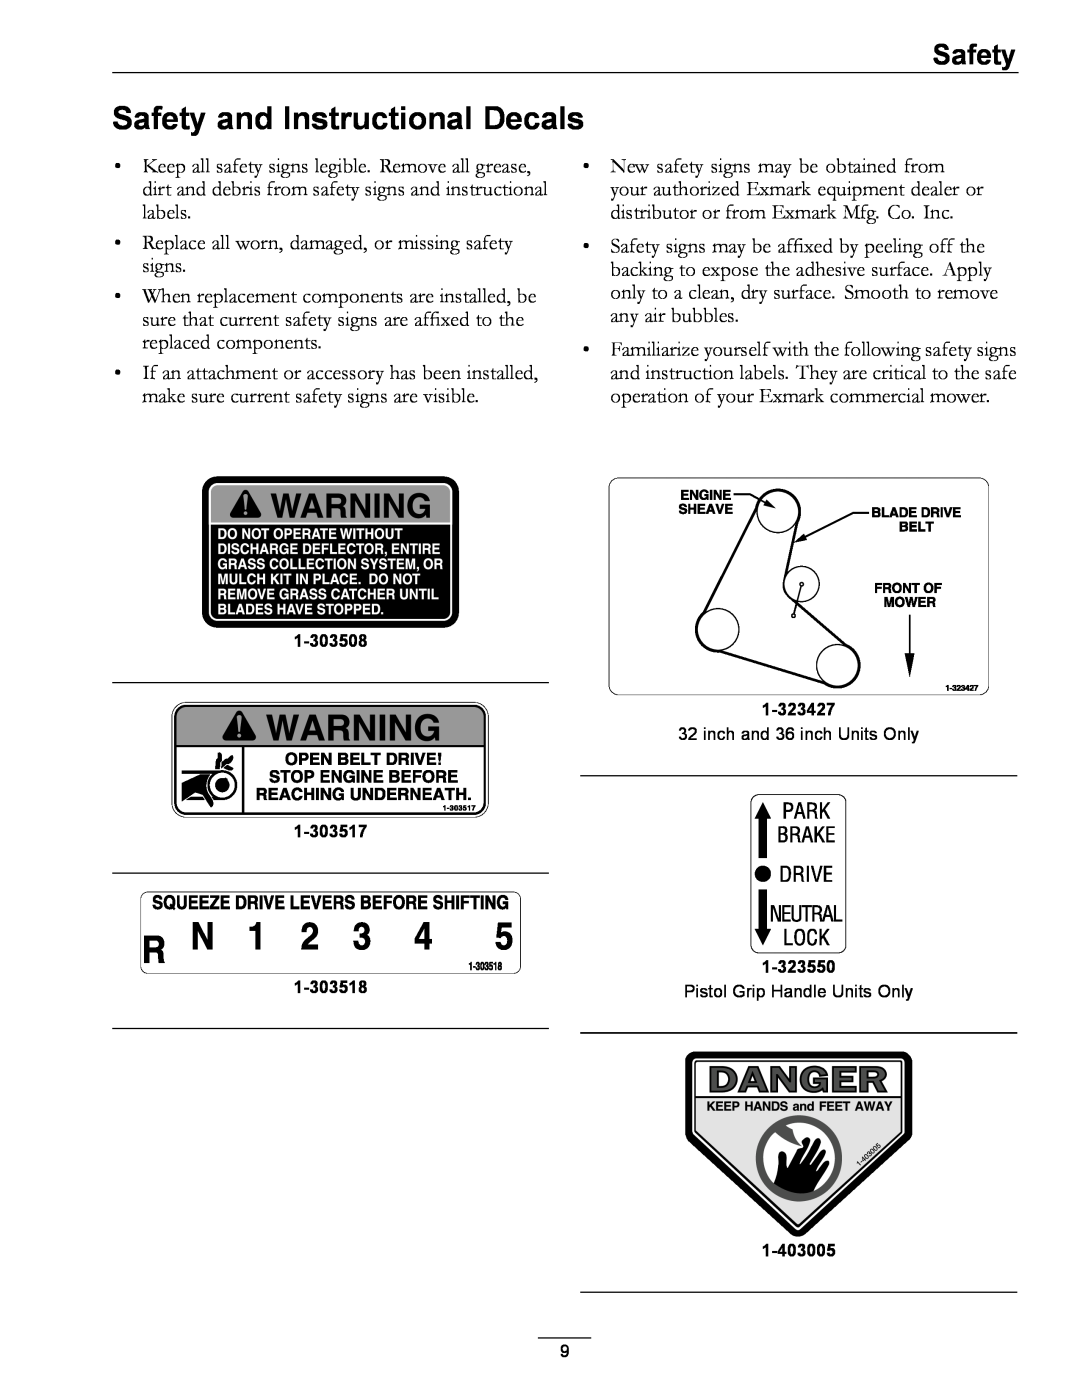 Exmark 4500-689 manual Safety and Instructional Decals 